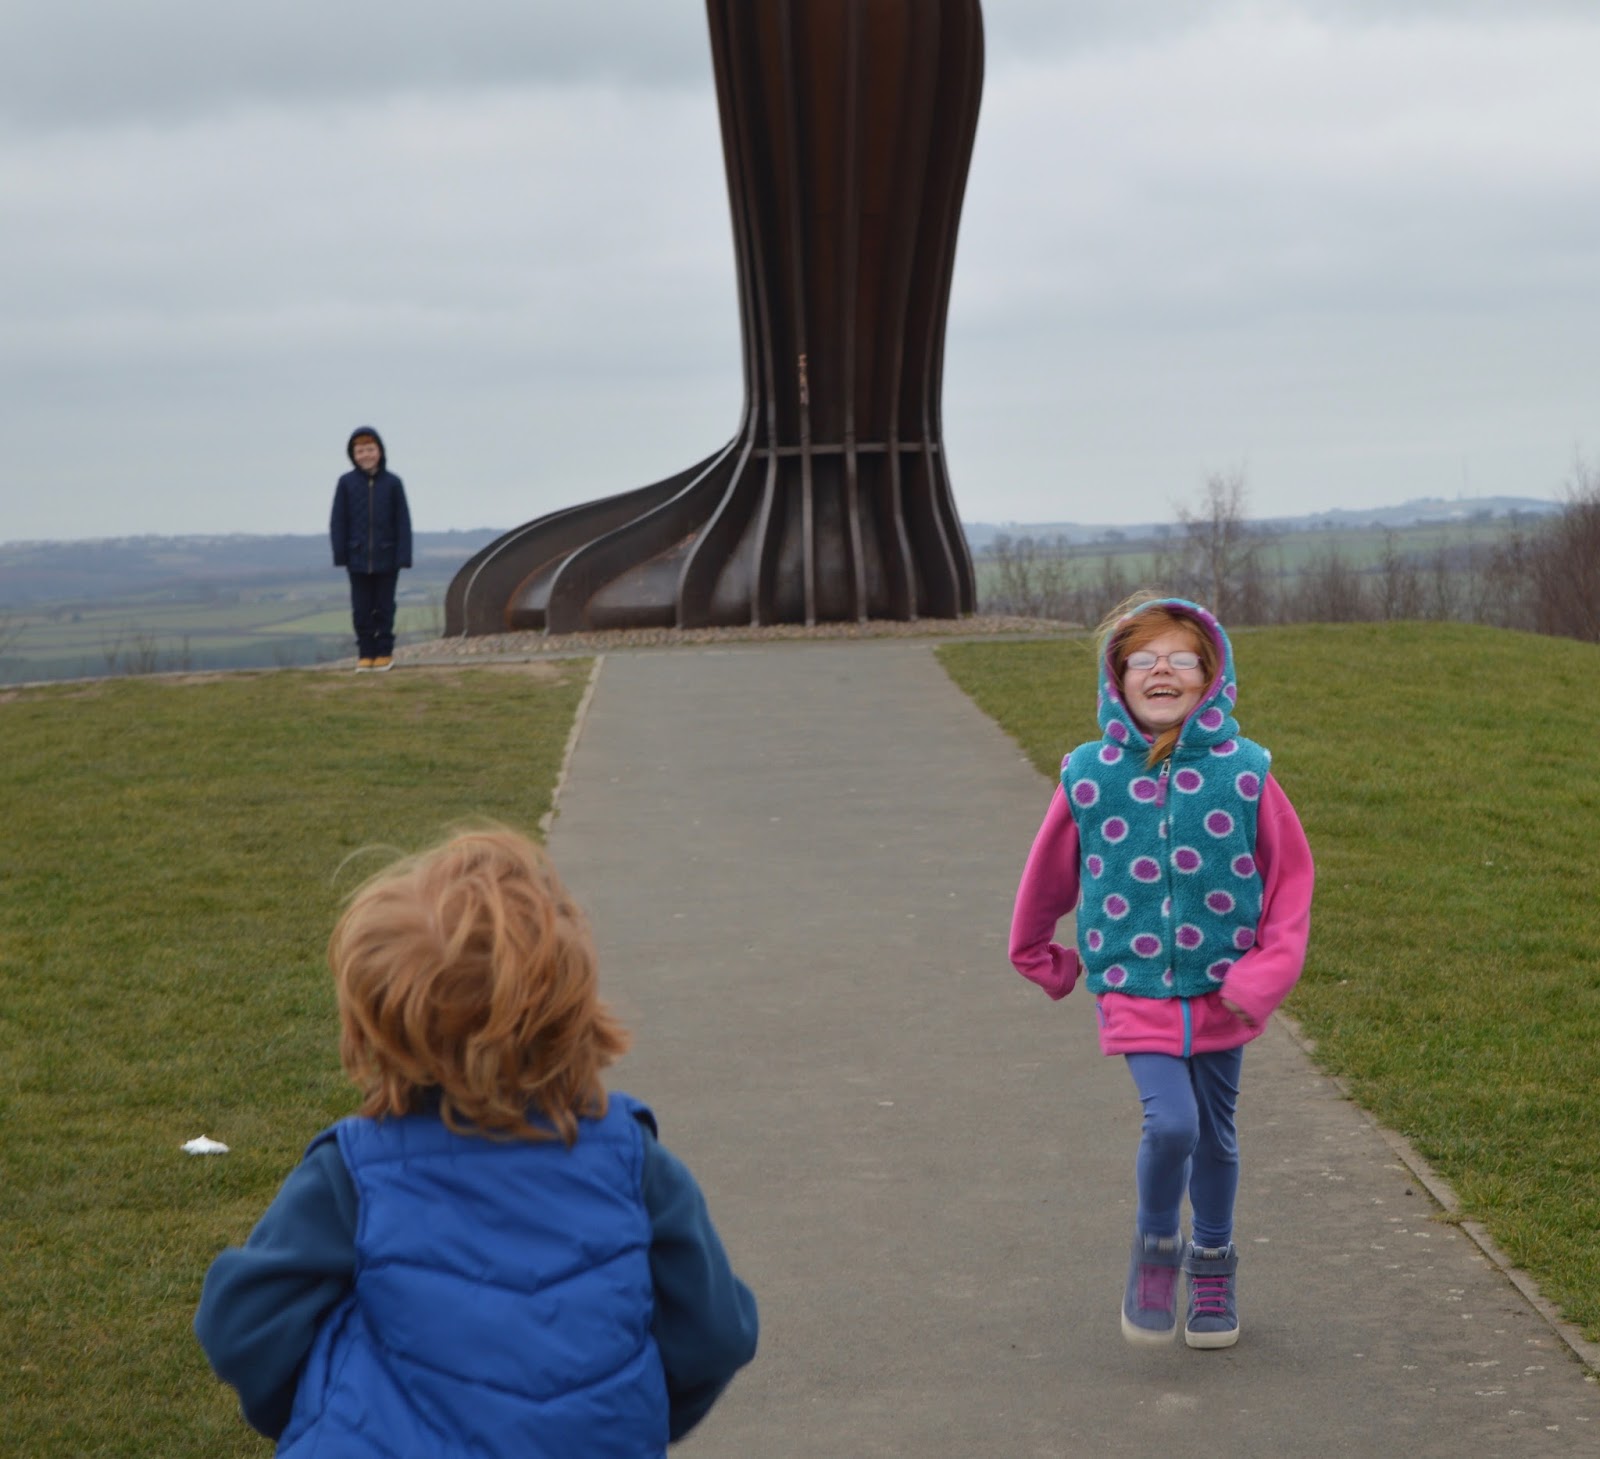 Visit the Angel of the North via bus with Go North East